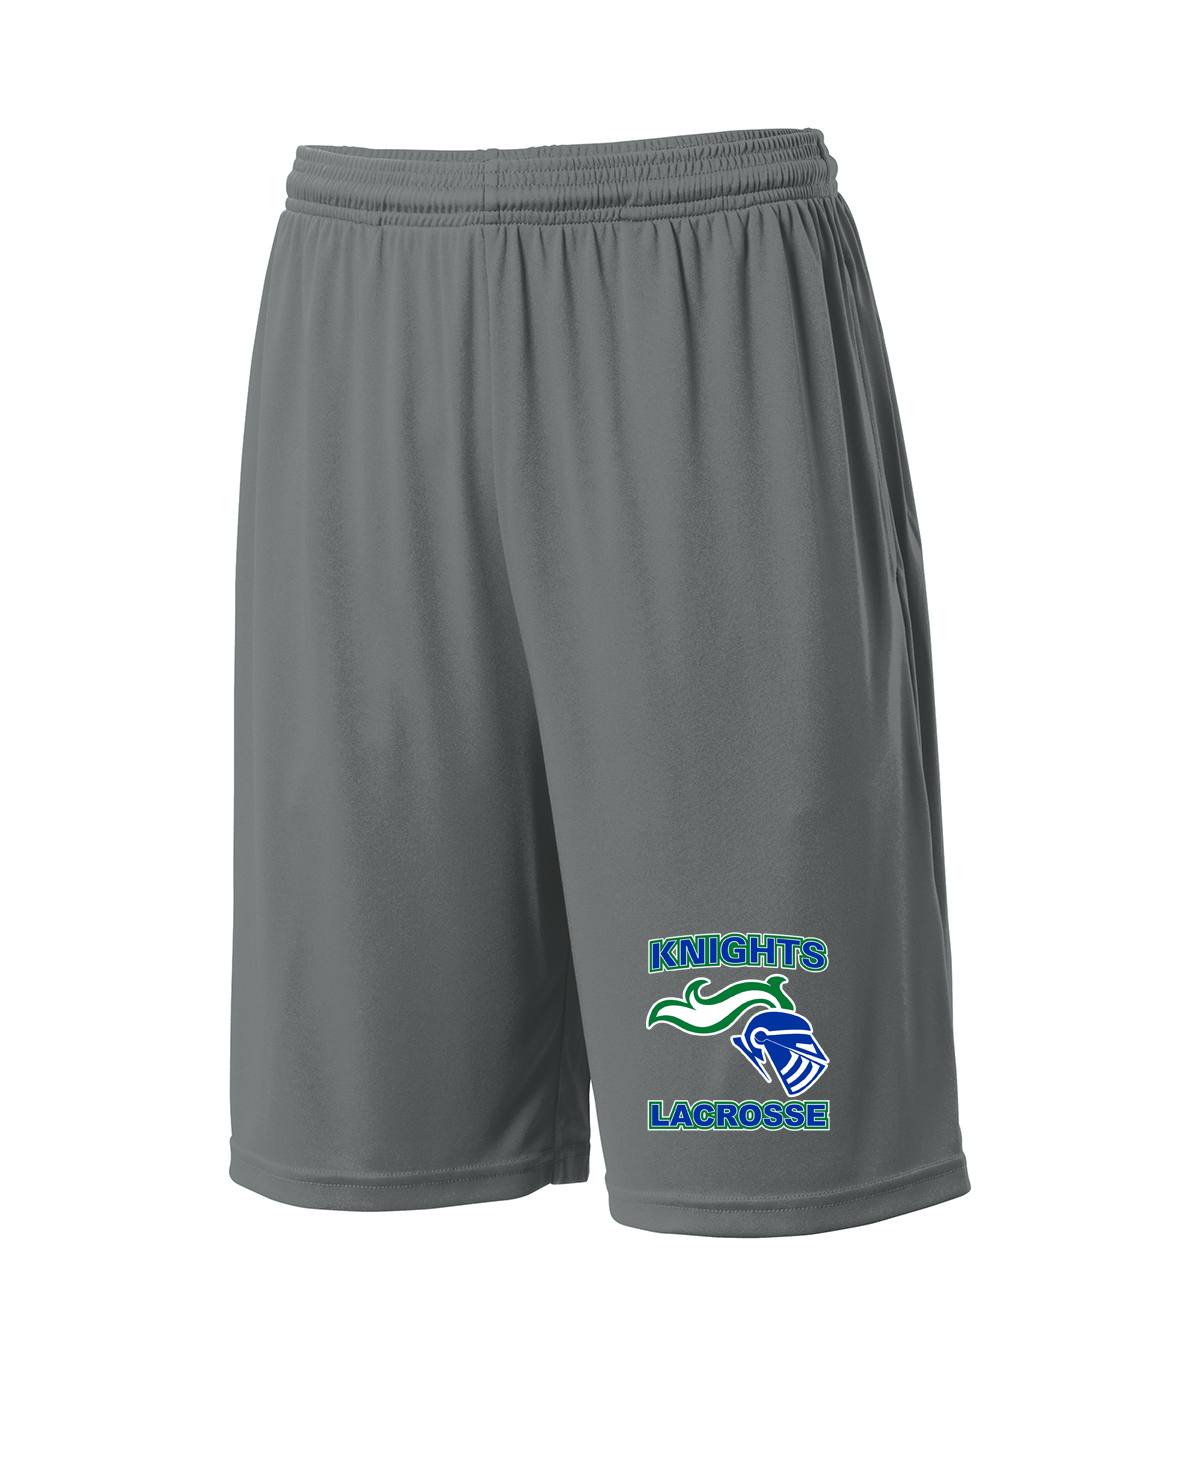 REQUIRED: Lake Norman Lacrosse Shorts